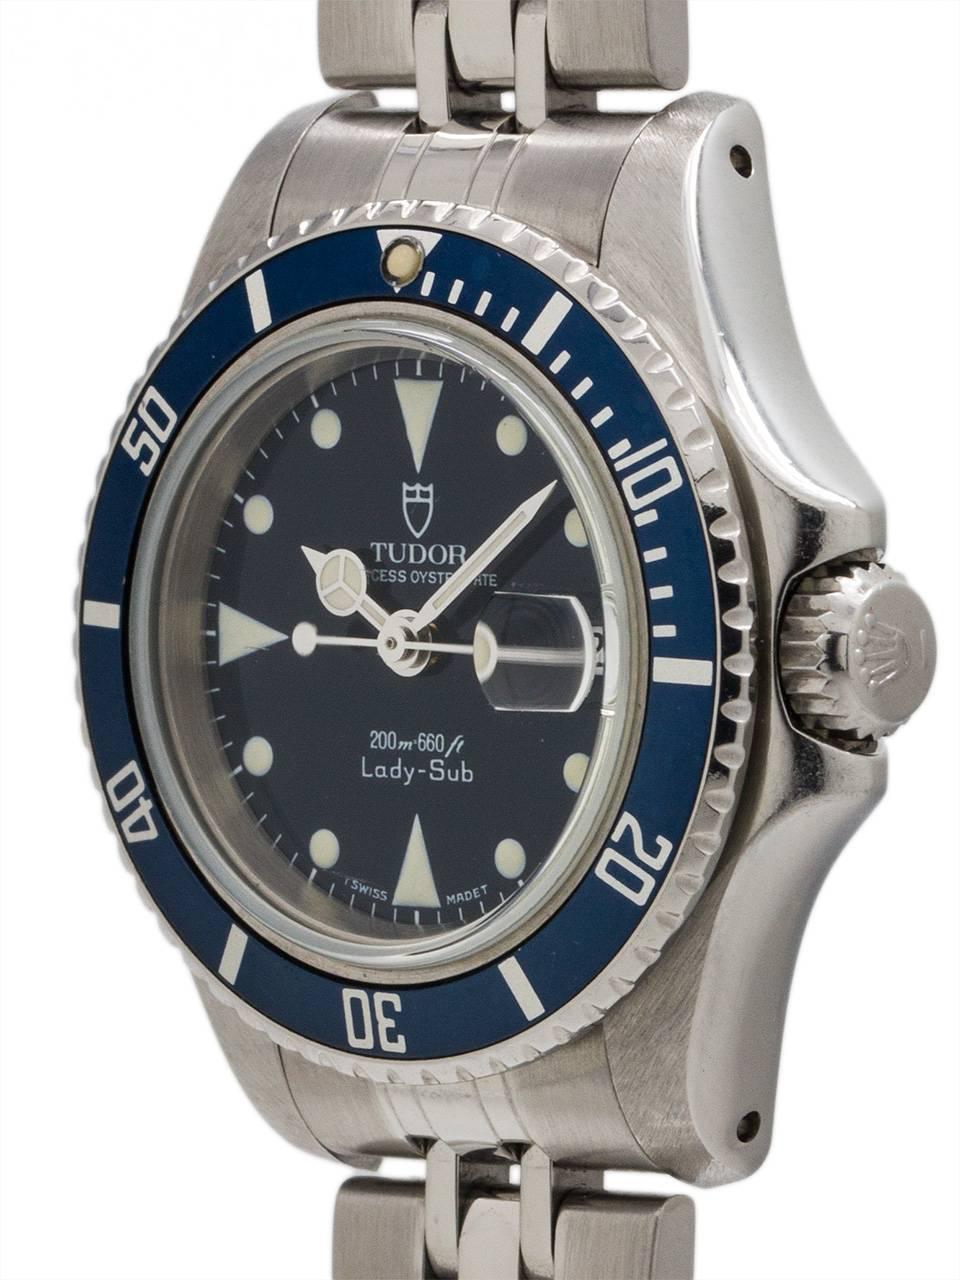 Excellent condition example Tudor Mini-Sub ref 96090 Serial: B419xxx circa 1990s. Women’s small size 27mm diameter stainless steel case with unidirectional blue elapsed time bezel and sapphire crystal. Original dark blue dial with tritium luminous